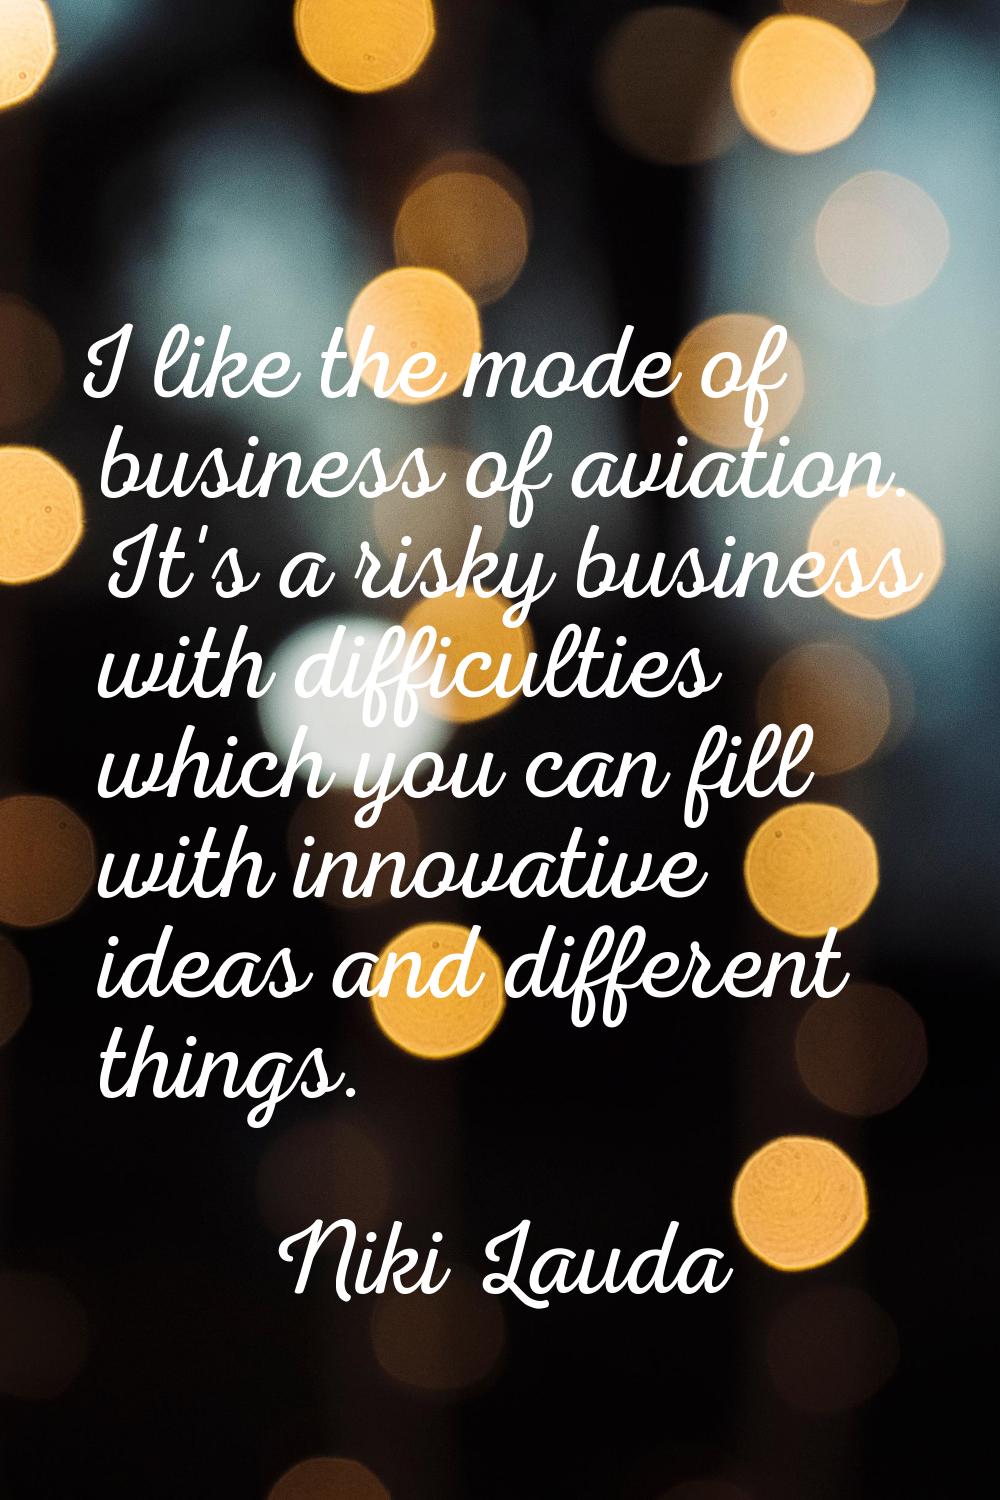 I like the mode of business of aviation. It's a risky business with difficulties which you can fill